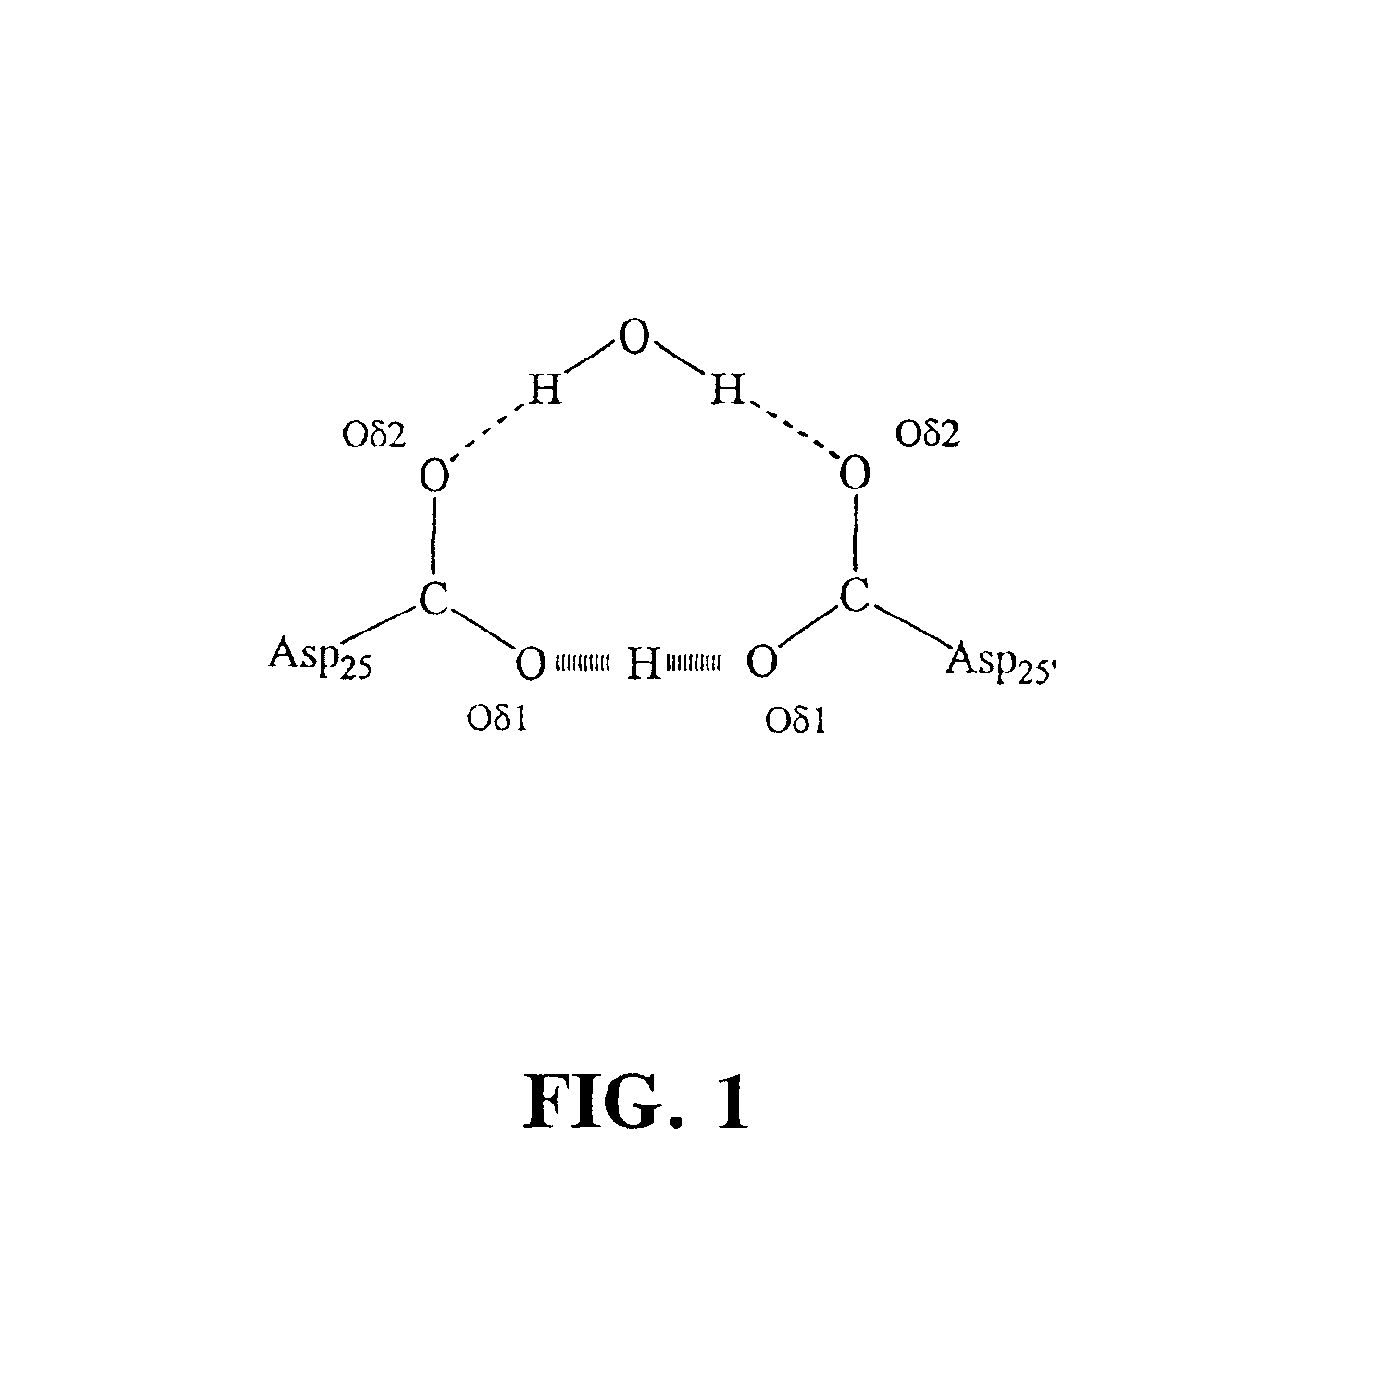 Method for evaluating inhibition of aspartic proteases